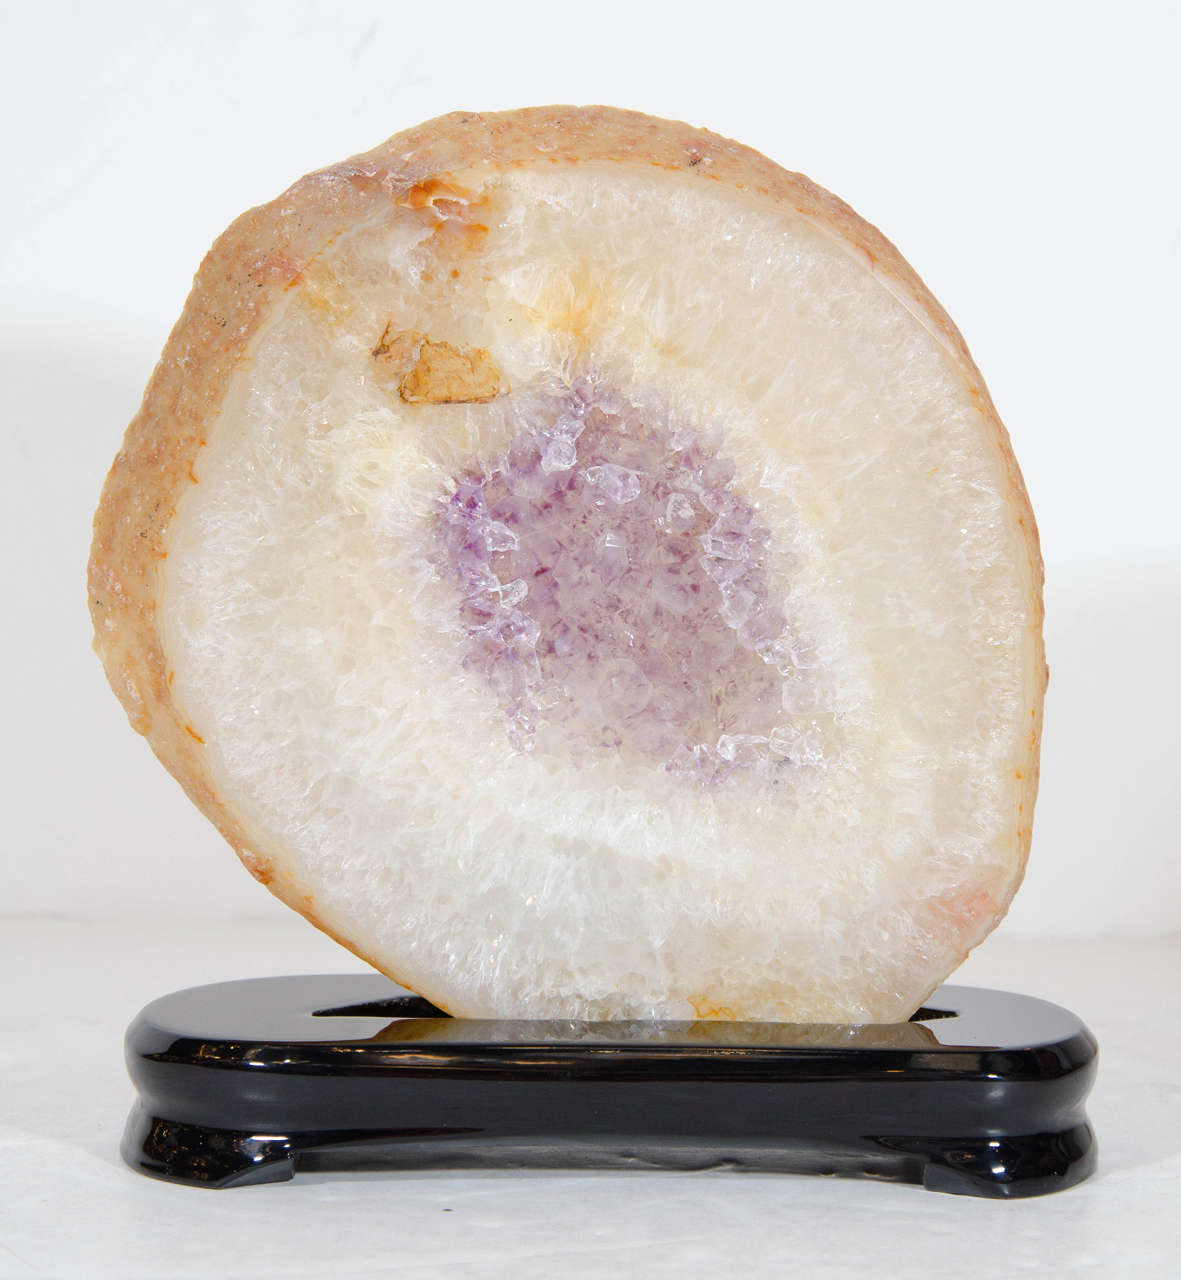 This sliced geode, with its honeyed exterior, crystalline ecru perimeter and lilac amethyst center, is absolutely stunning. It sits on an elegant ebonized walnut base. The simple circular form and subtle palate ensures that it will blend seamlessly